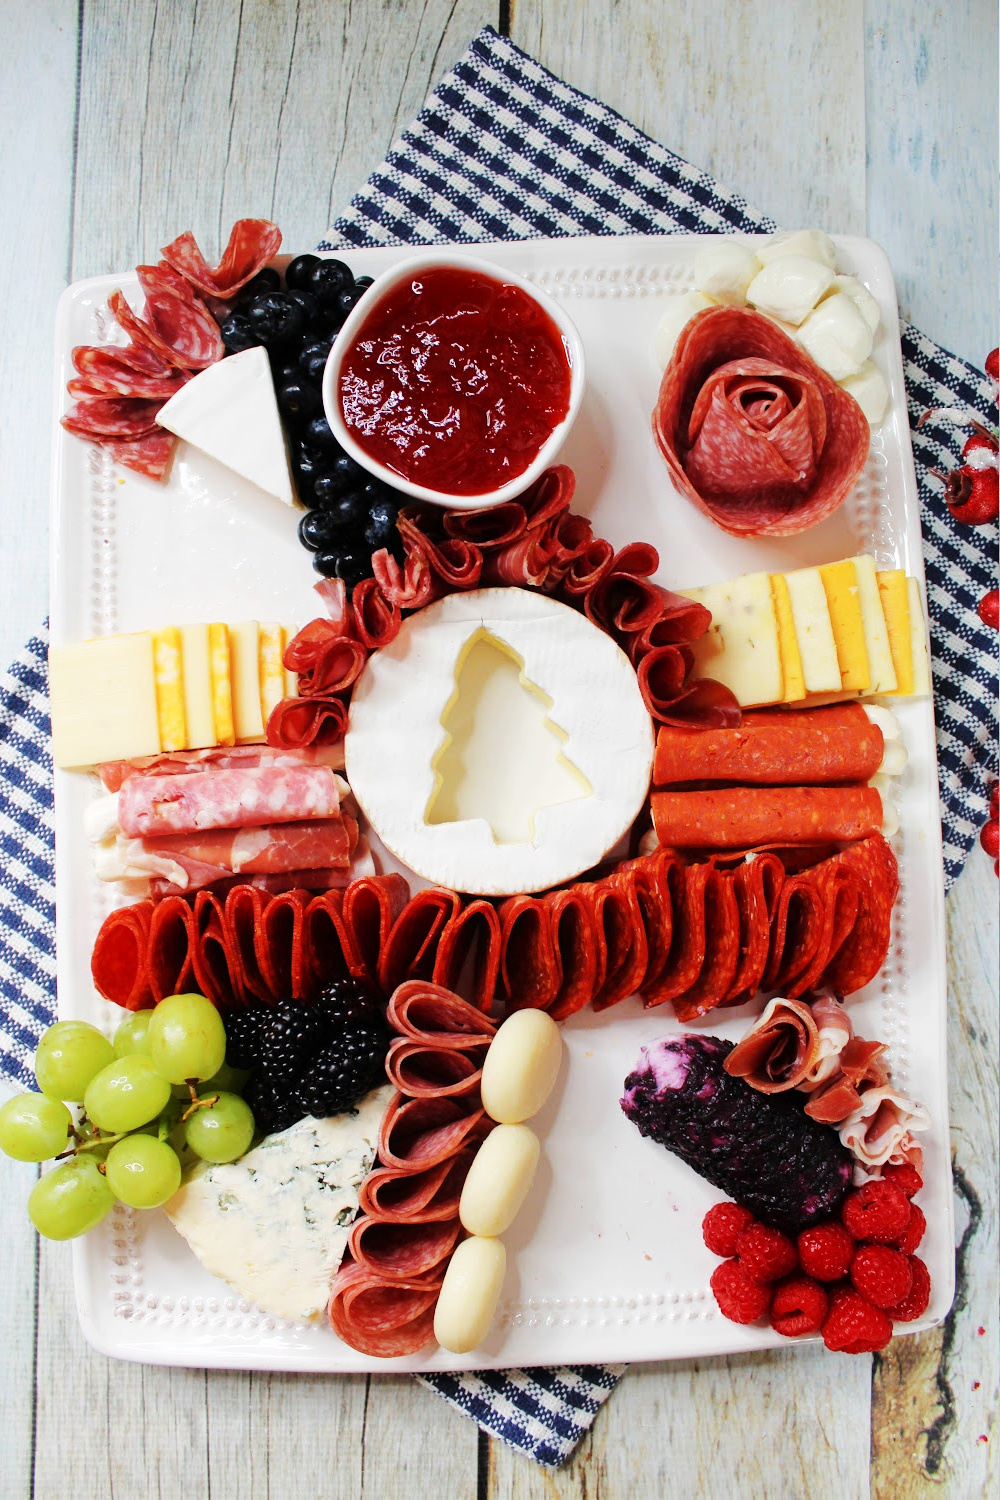 Add fruits and jellies to the charcuterie board.